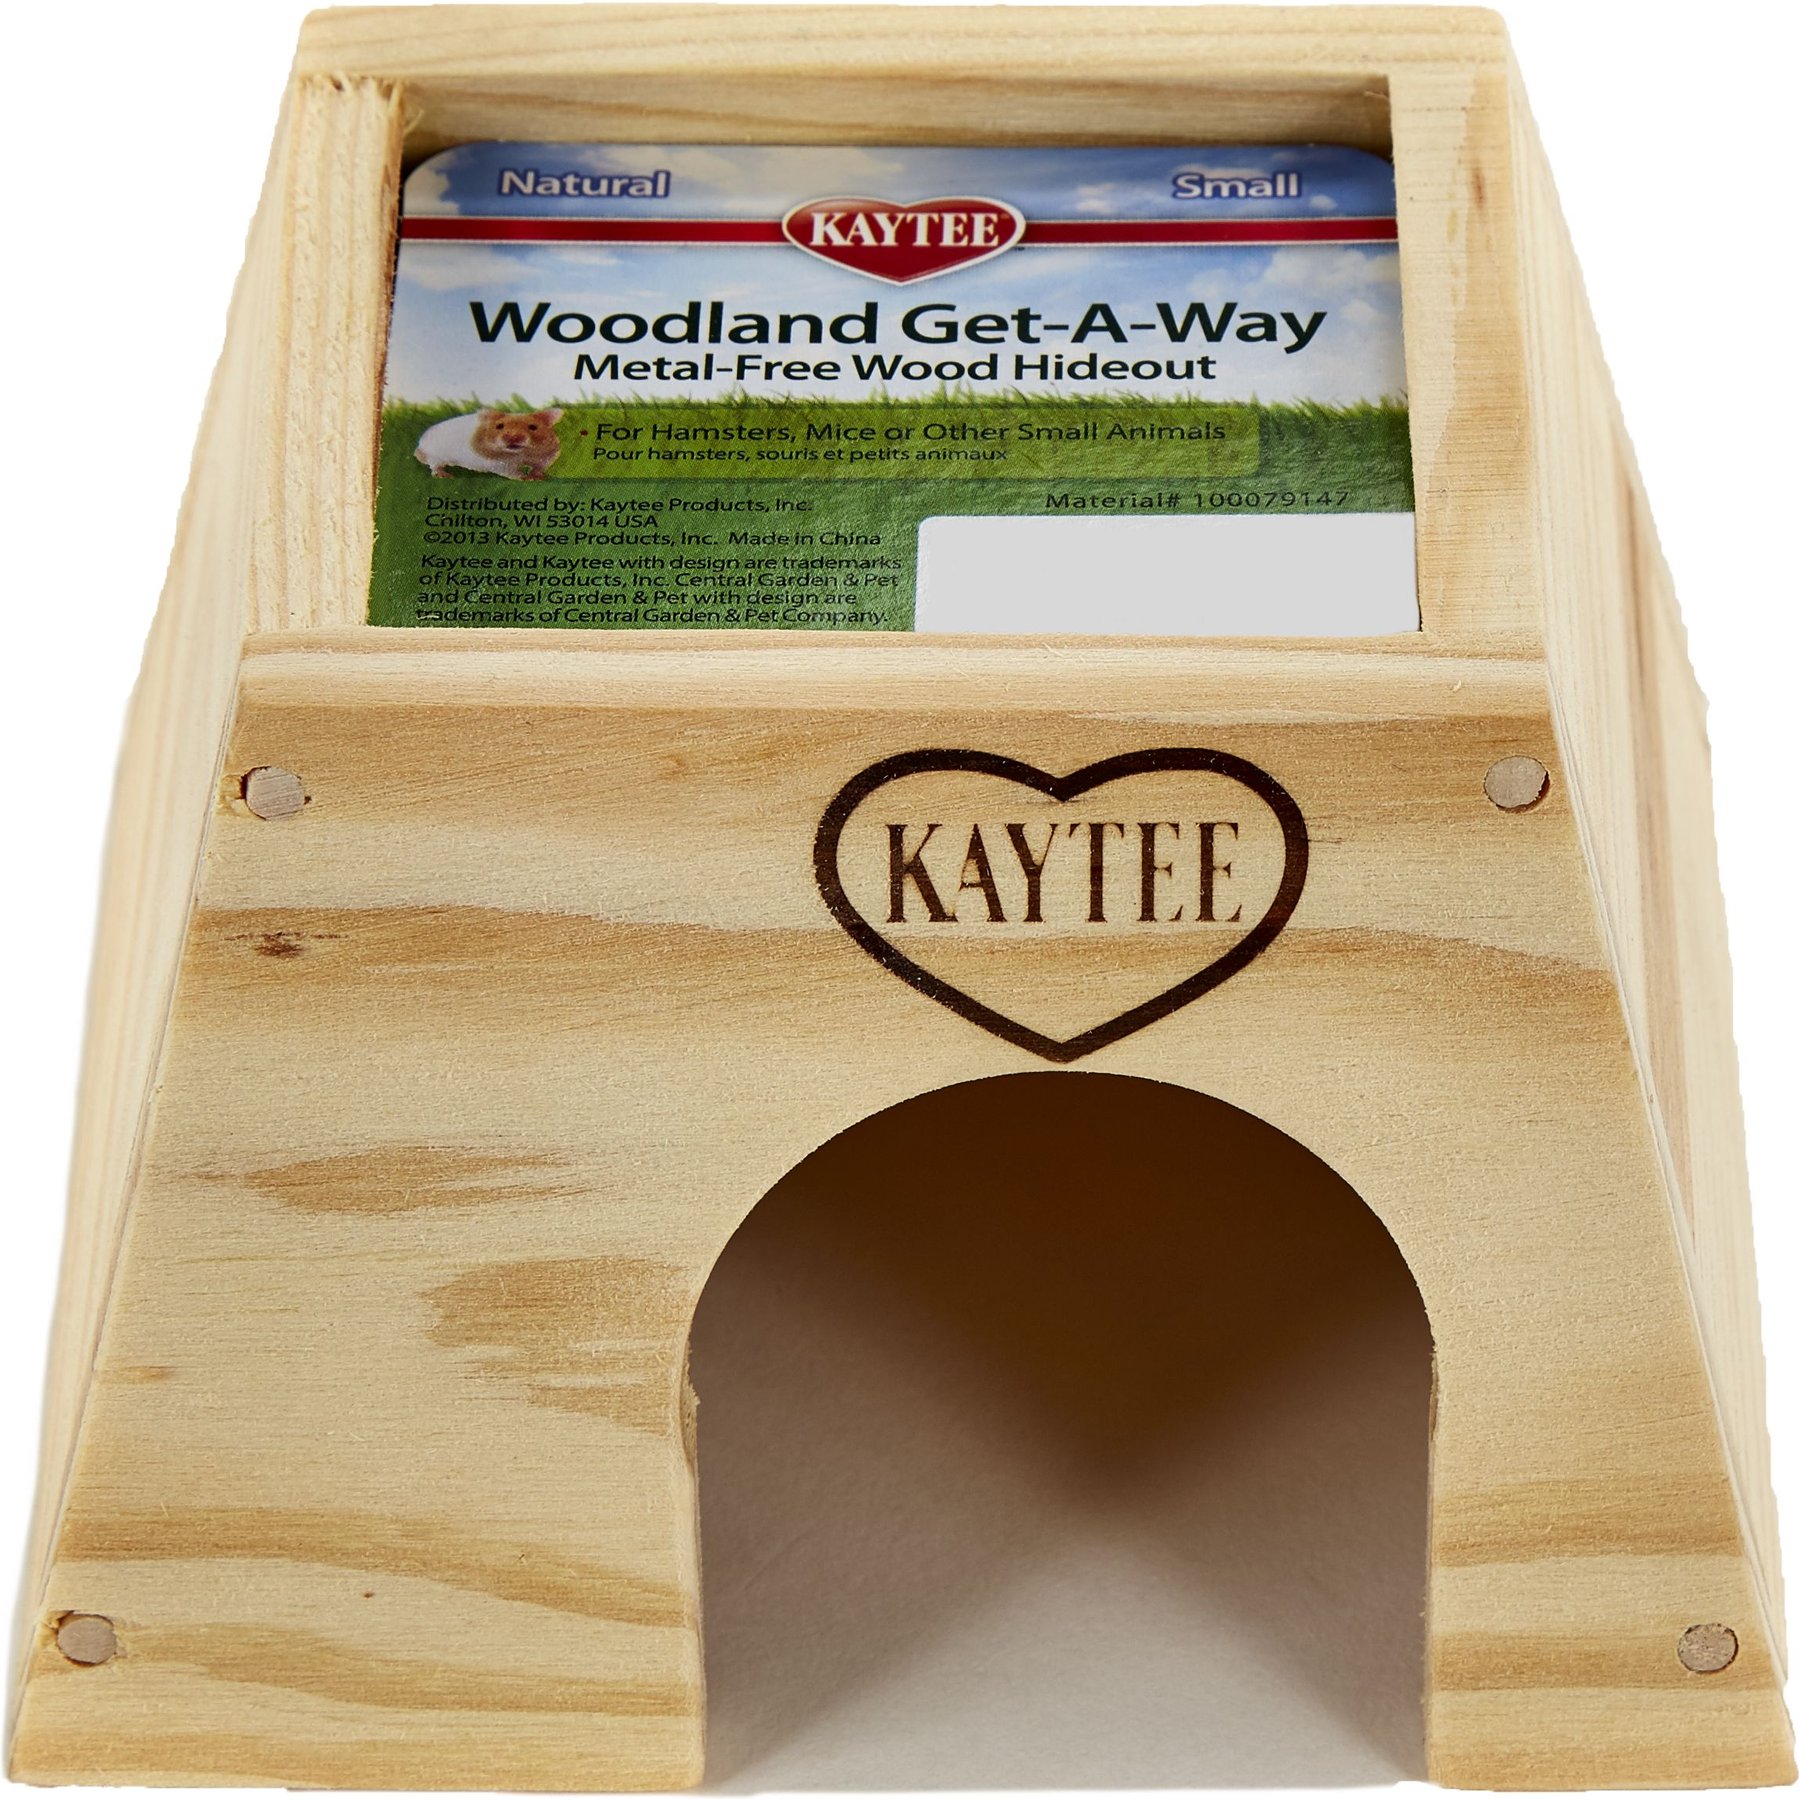 Peter's Woven Grass Hide-A-Way Hut for Small Animals at Tractor Supply Co.